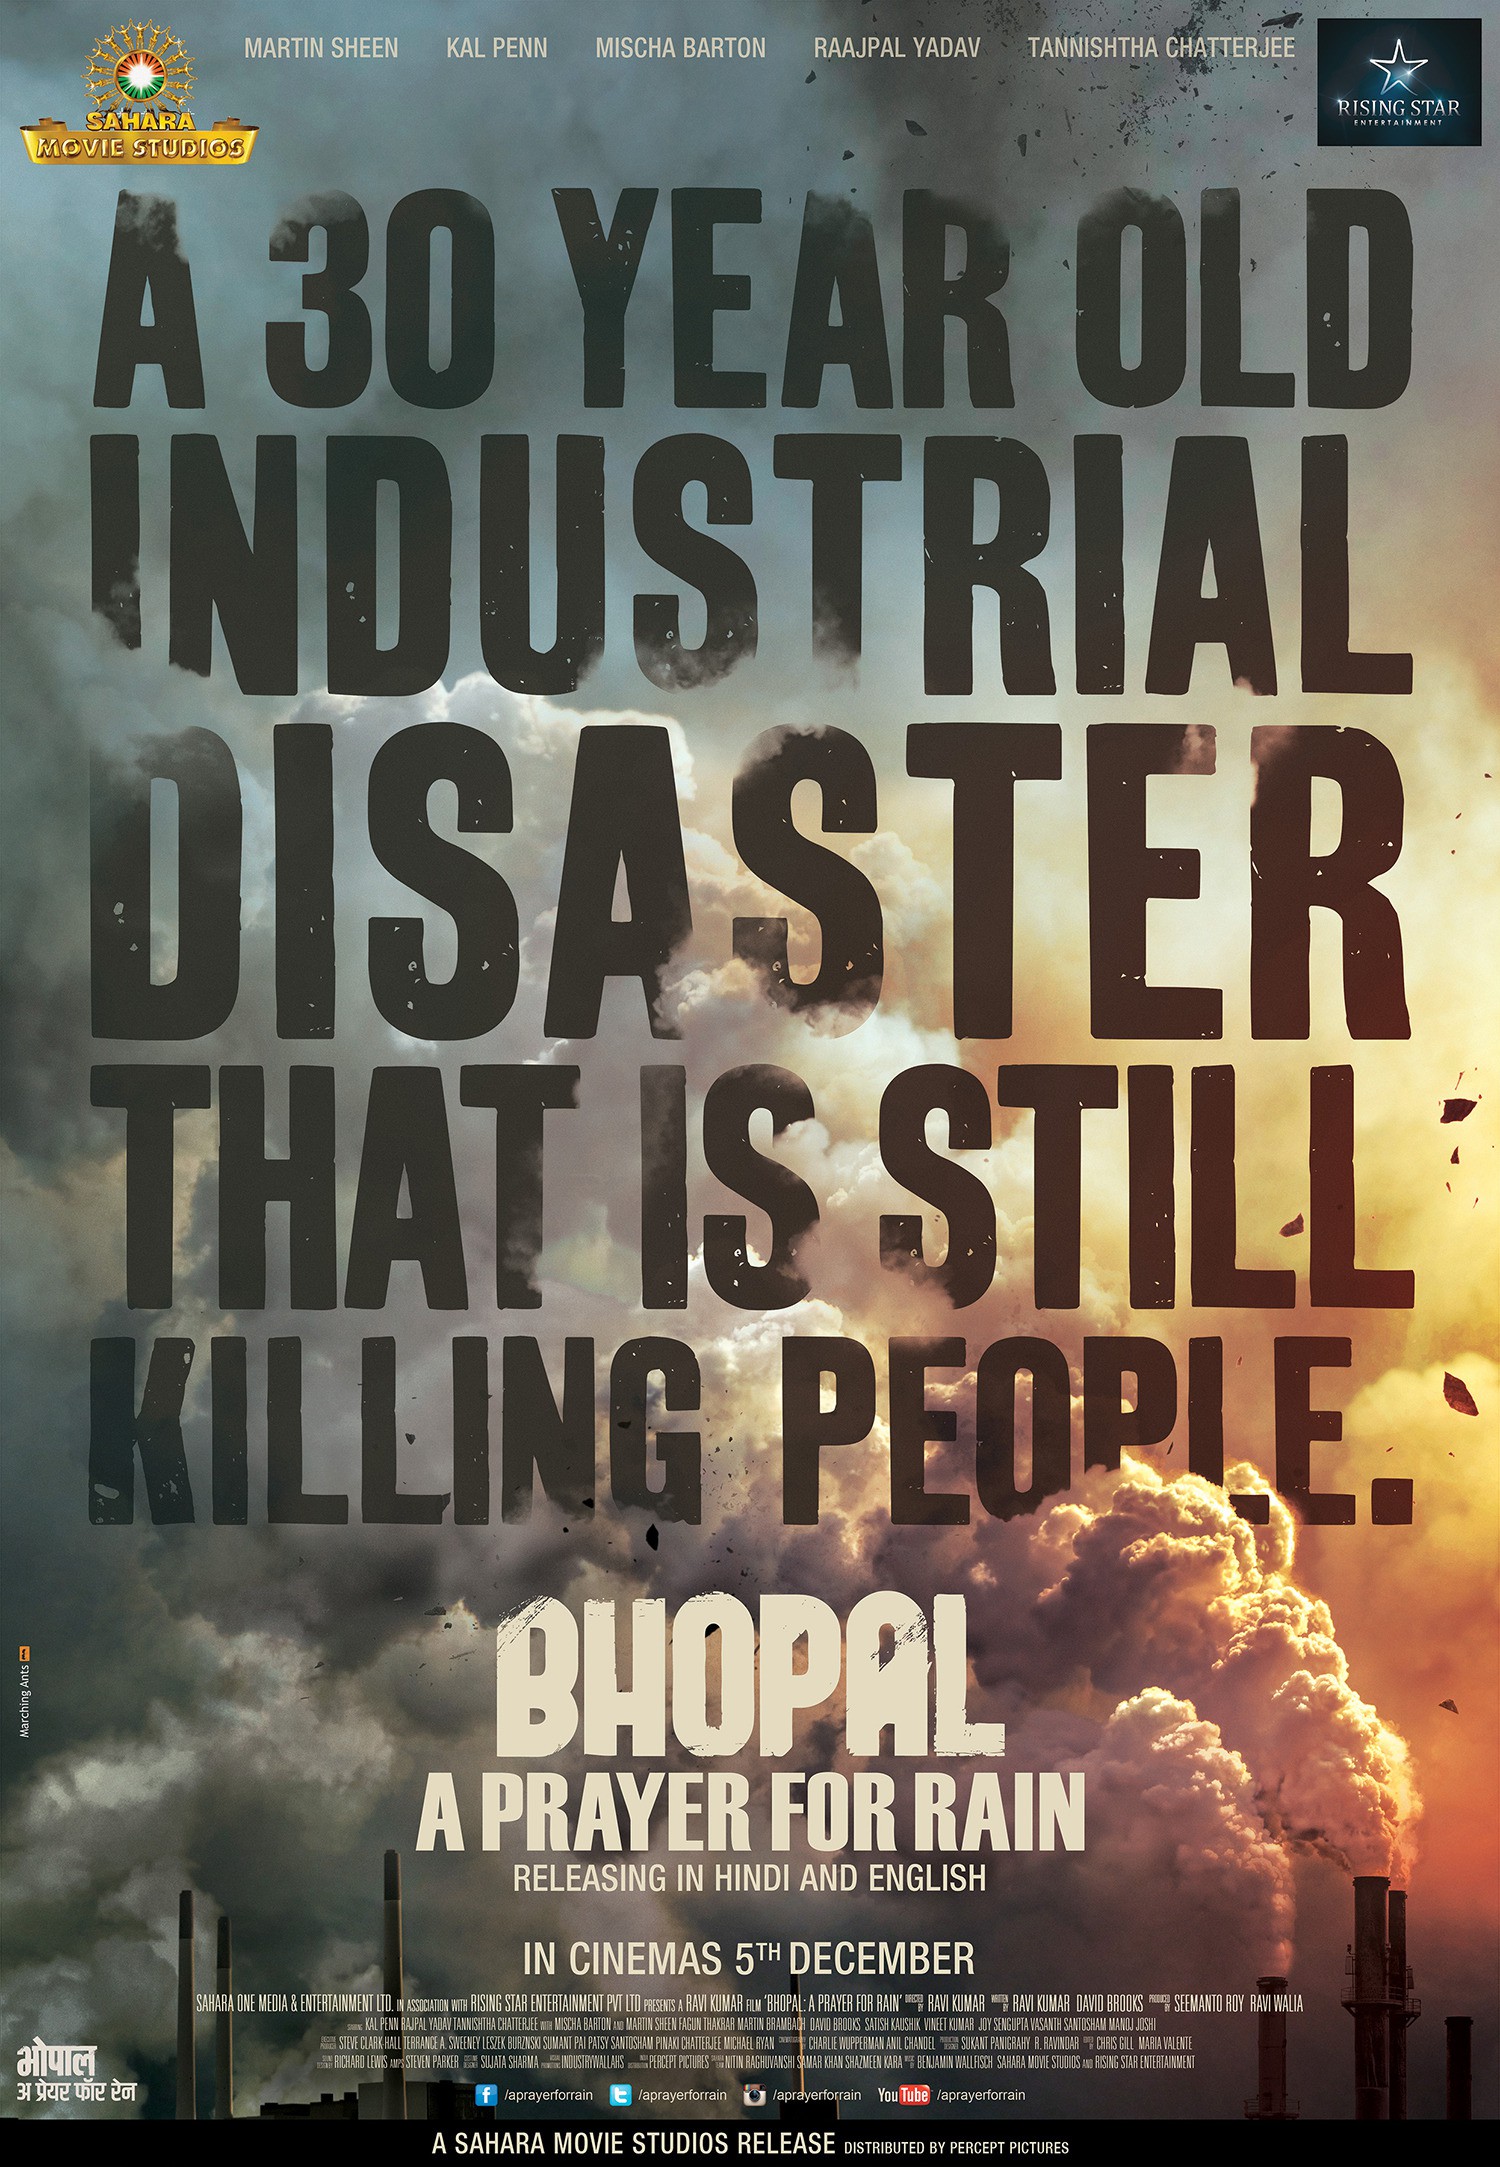 Mega Sized Movie Poster Image for Bhopal: A Prayer for Rain (#3 of 5)